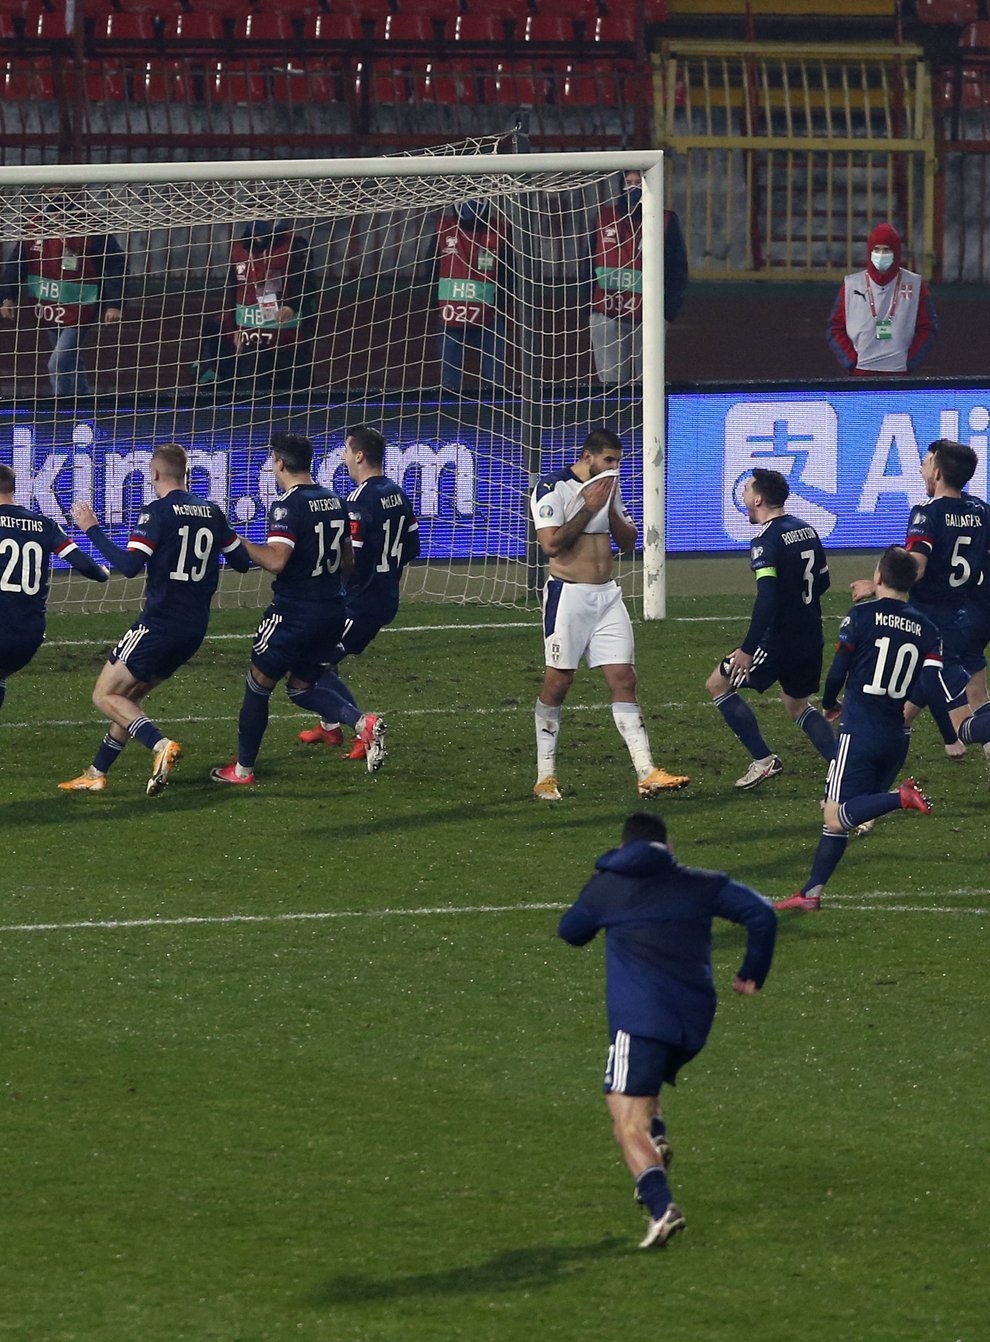 Scotland qualified for their first major tournament in 22 years with a penalty shoot-out win in Serbia on Thursday